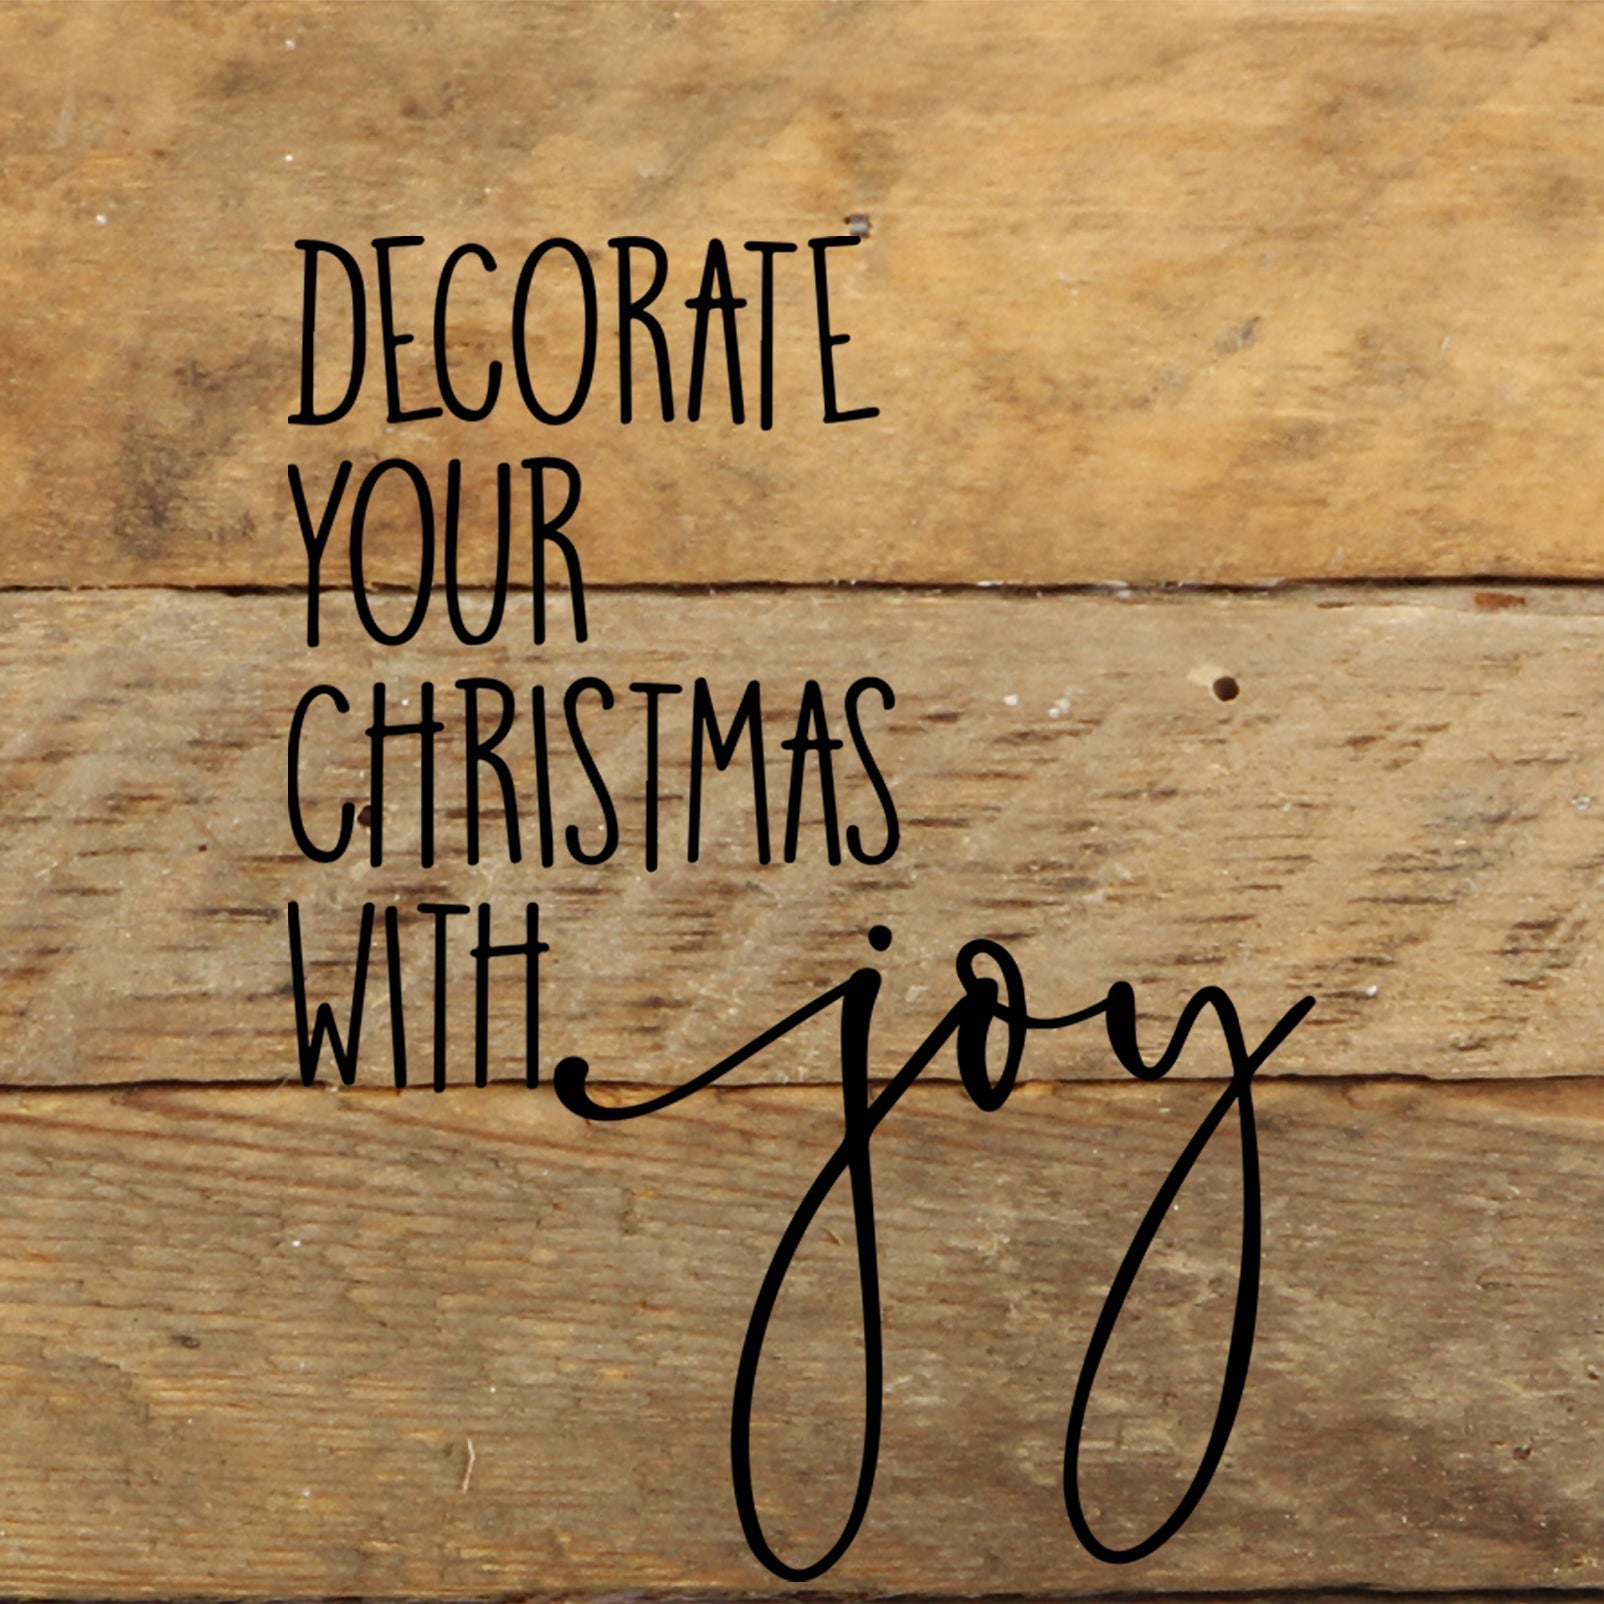 Decorate your Christmas with joy. / 6"x6" Reclaimed Wood Sign